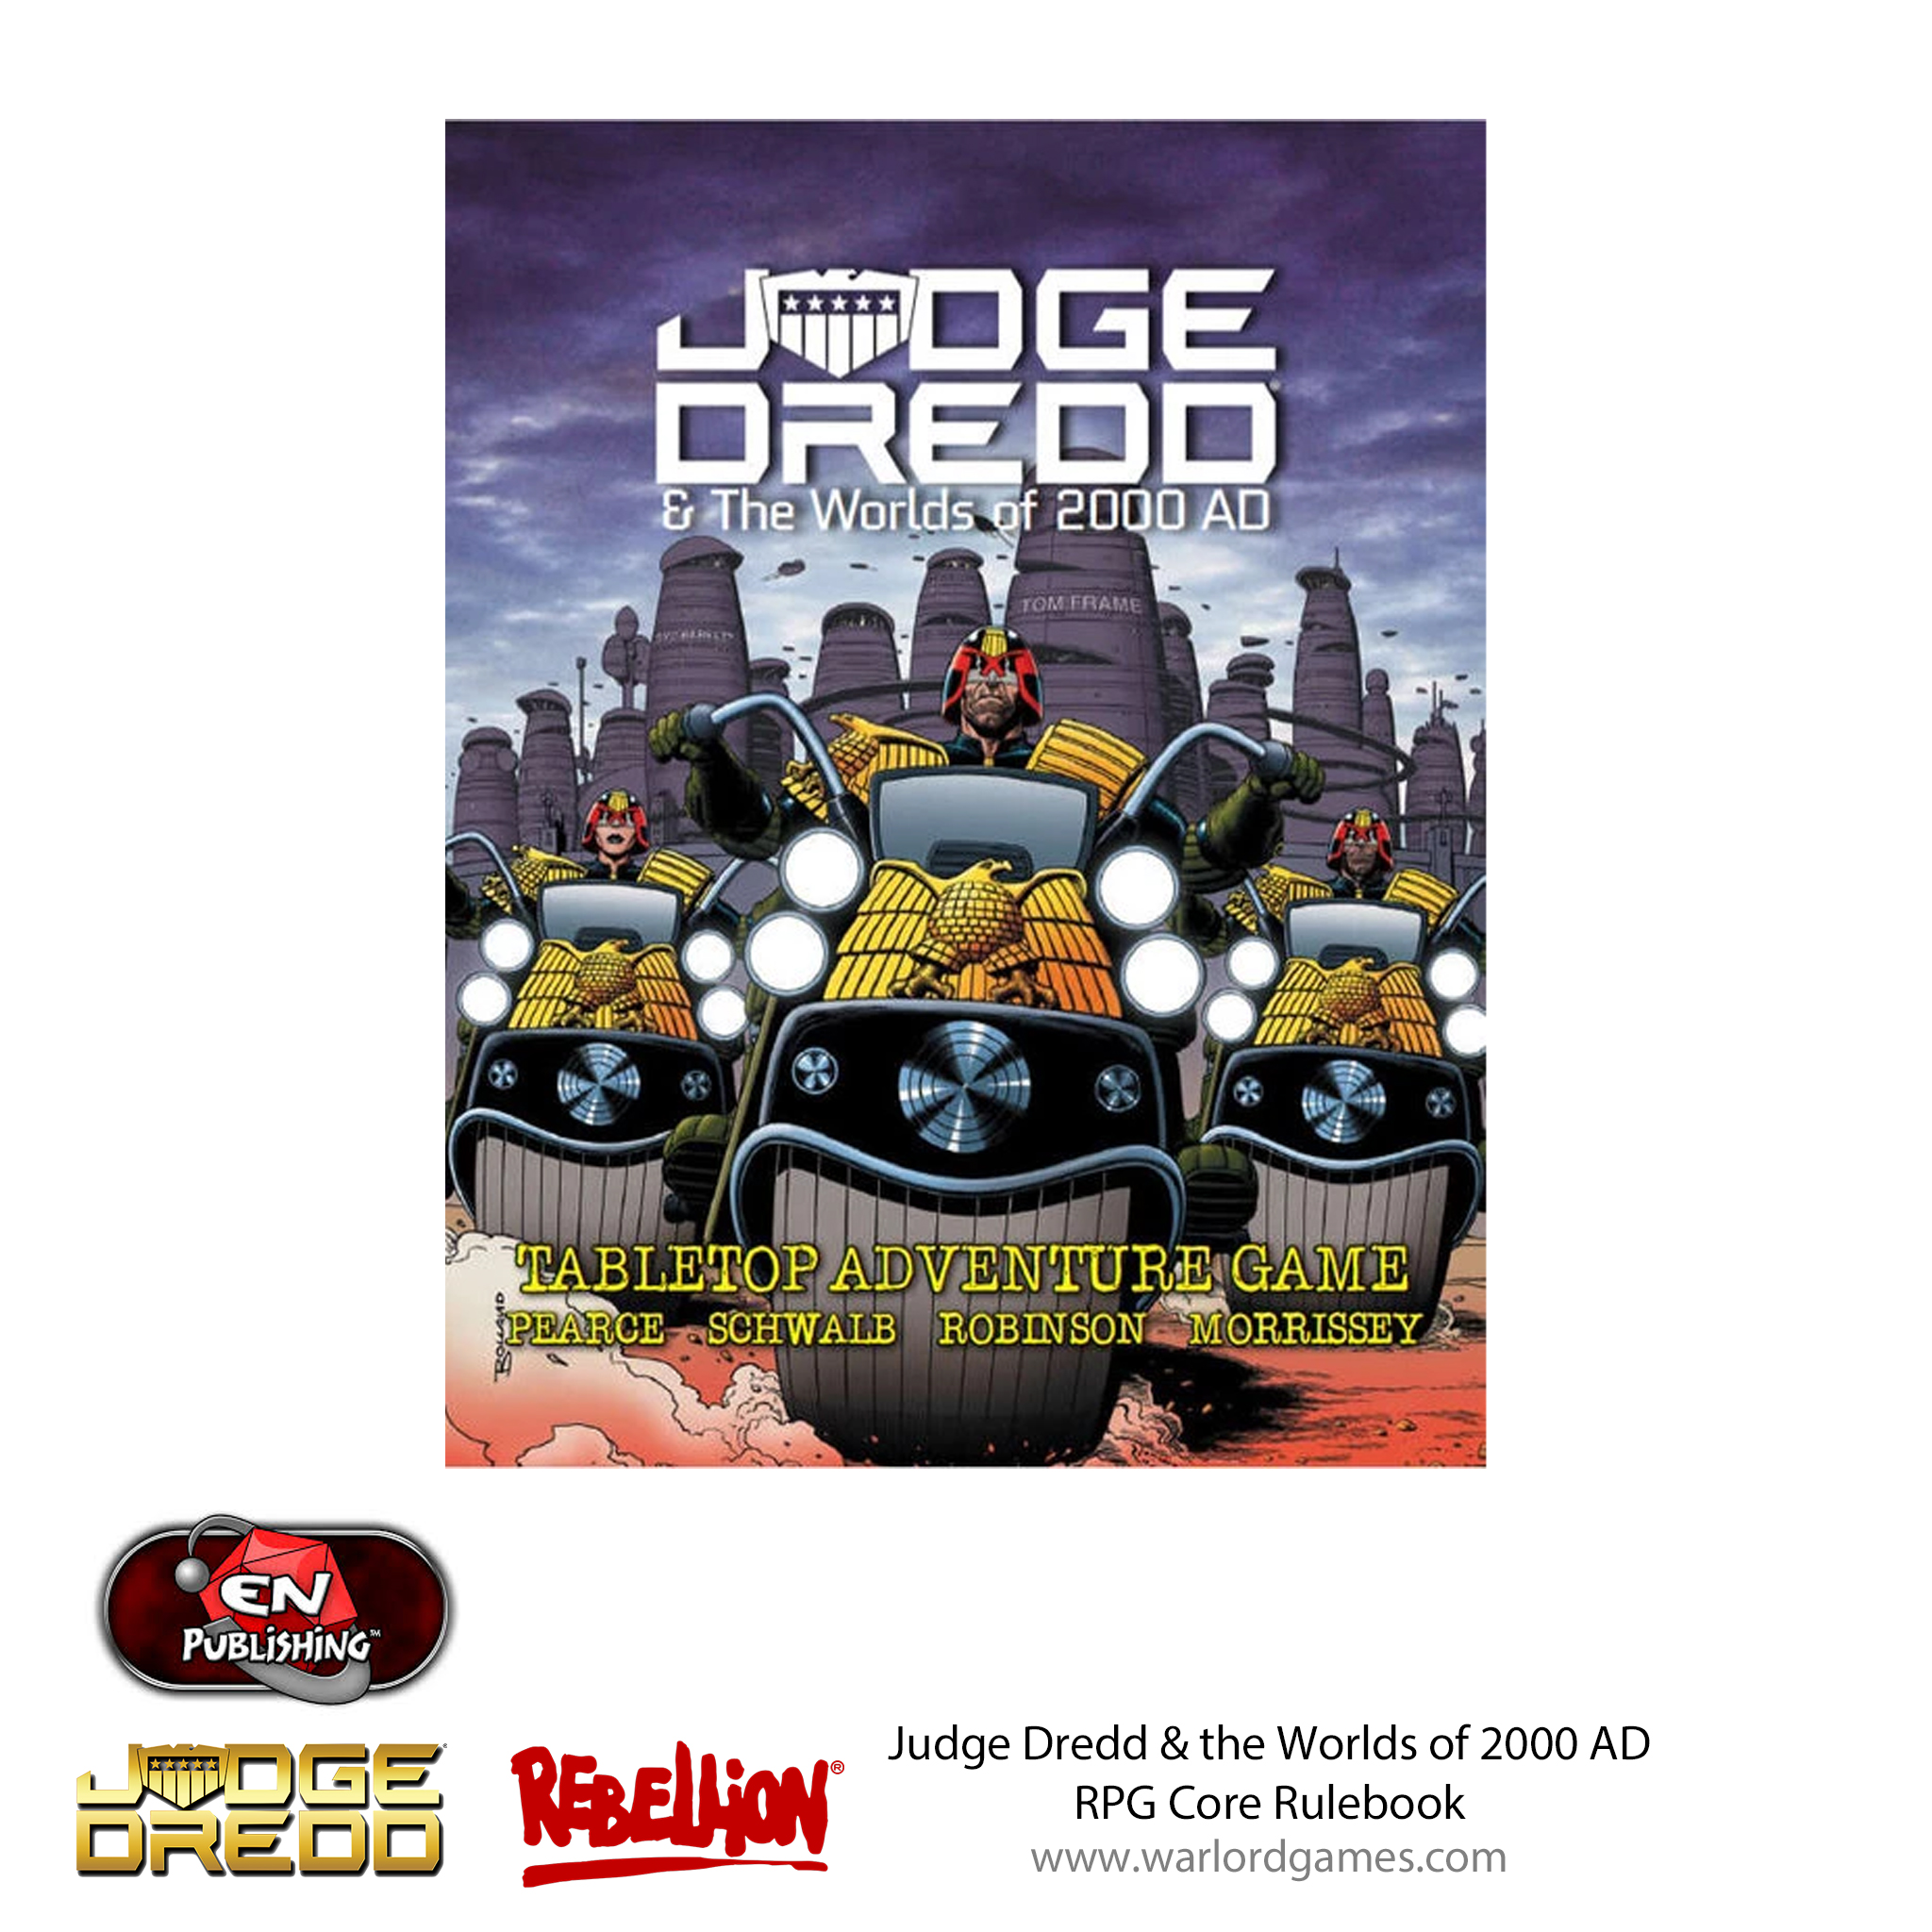 Judge Dredd & the Worlds of 2000 AD RPG Core Rulebook